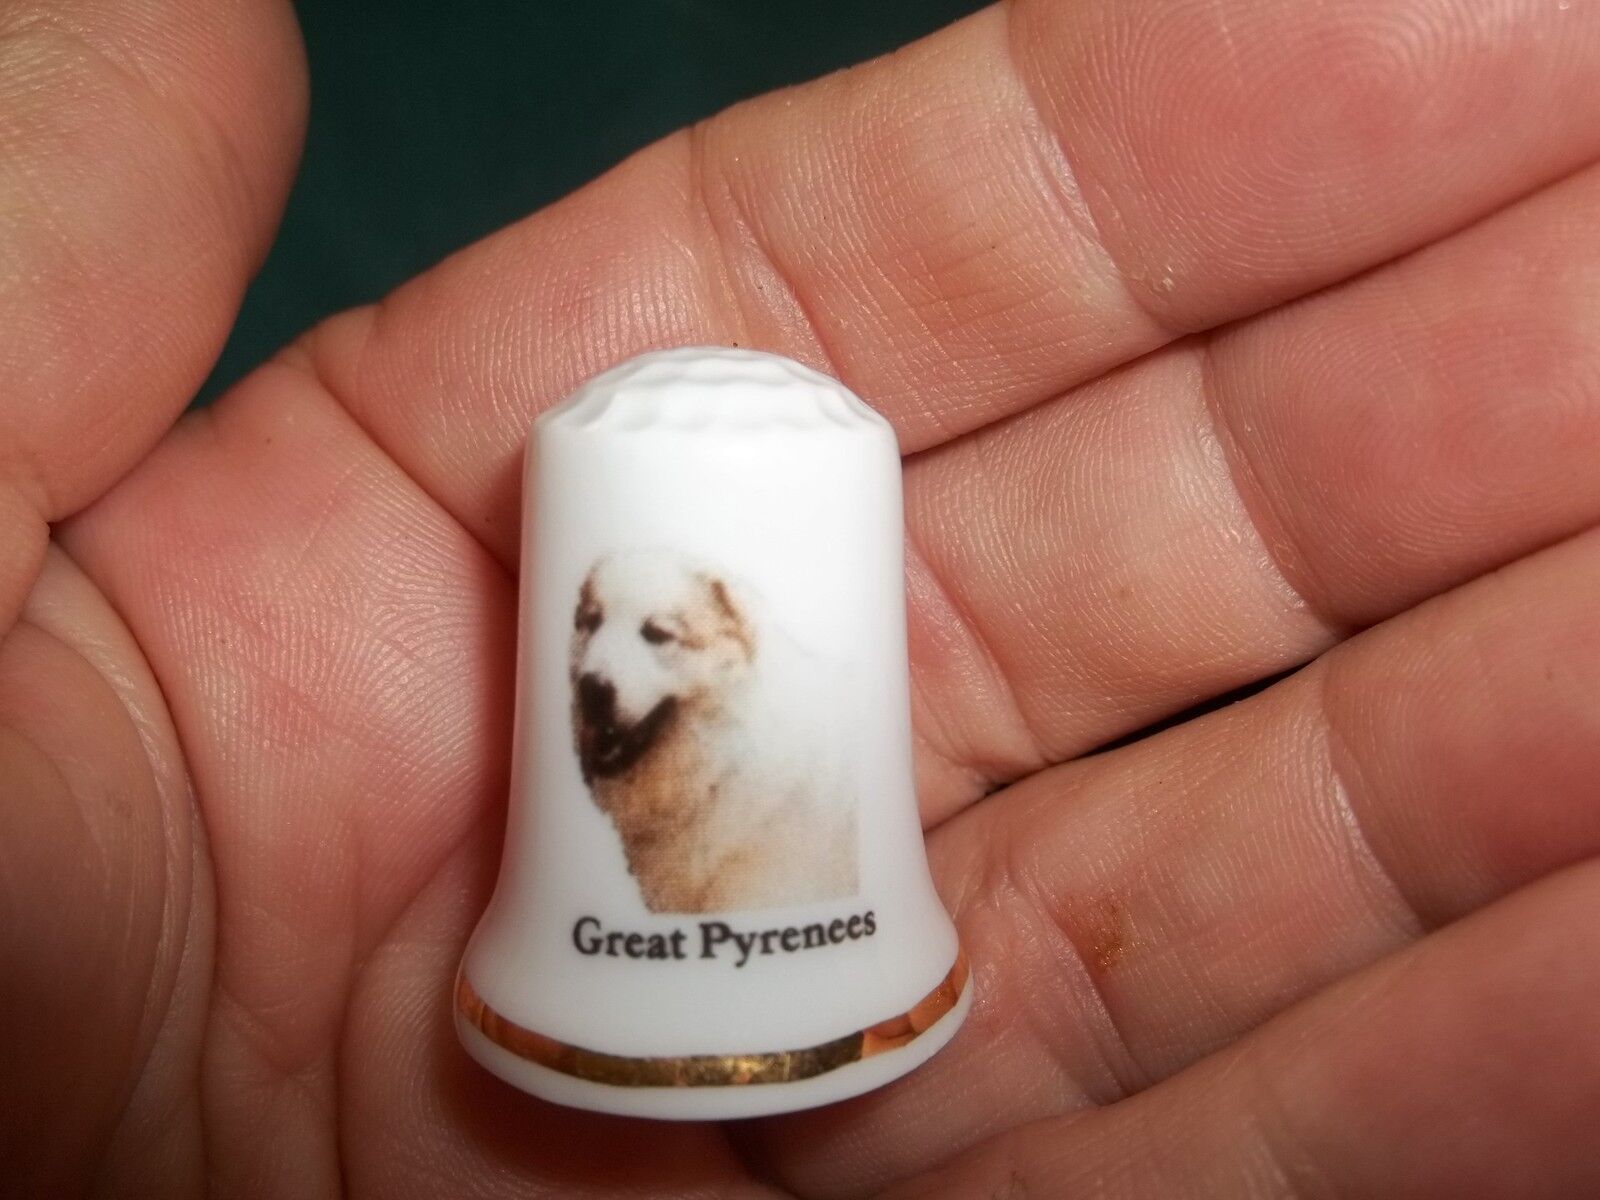 Vintage Great Pyrenees Dog Collectible Ceramic Thimble Figurine Limited Edition